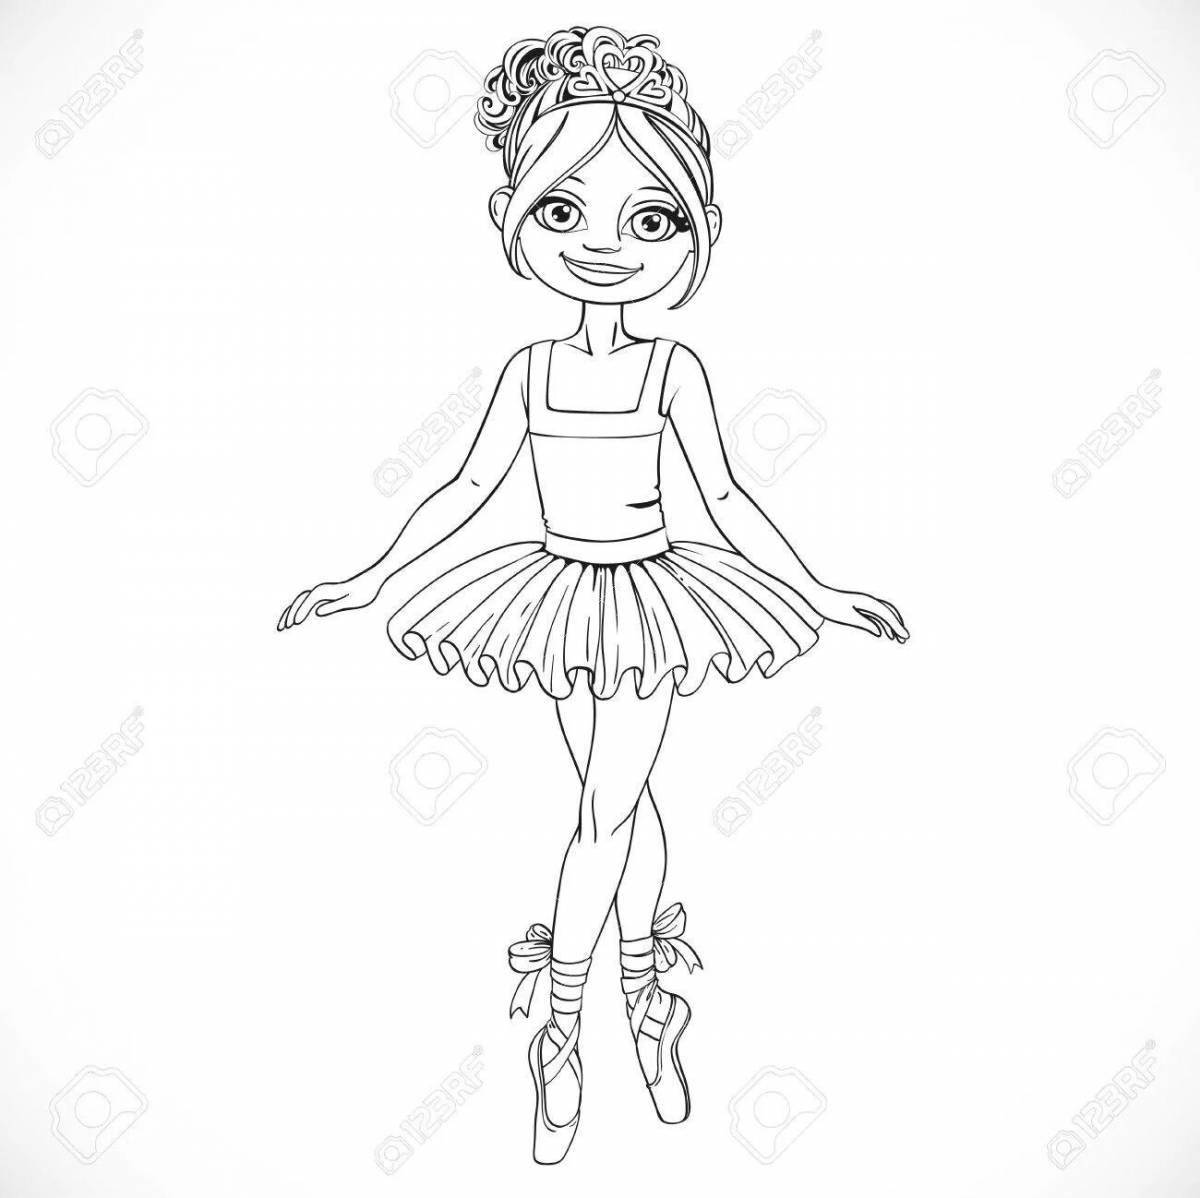 Coloring page exquisite ballerina